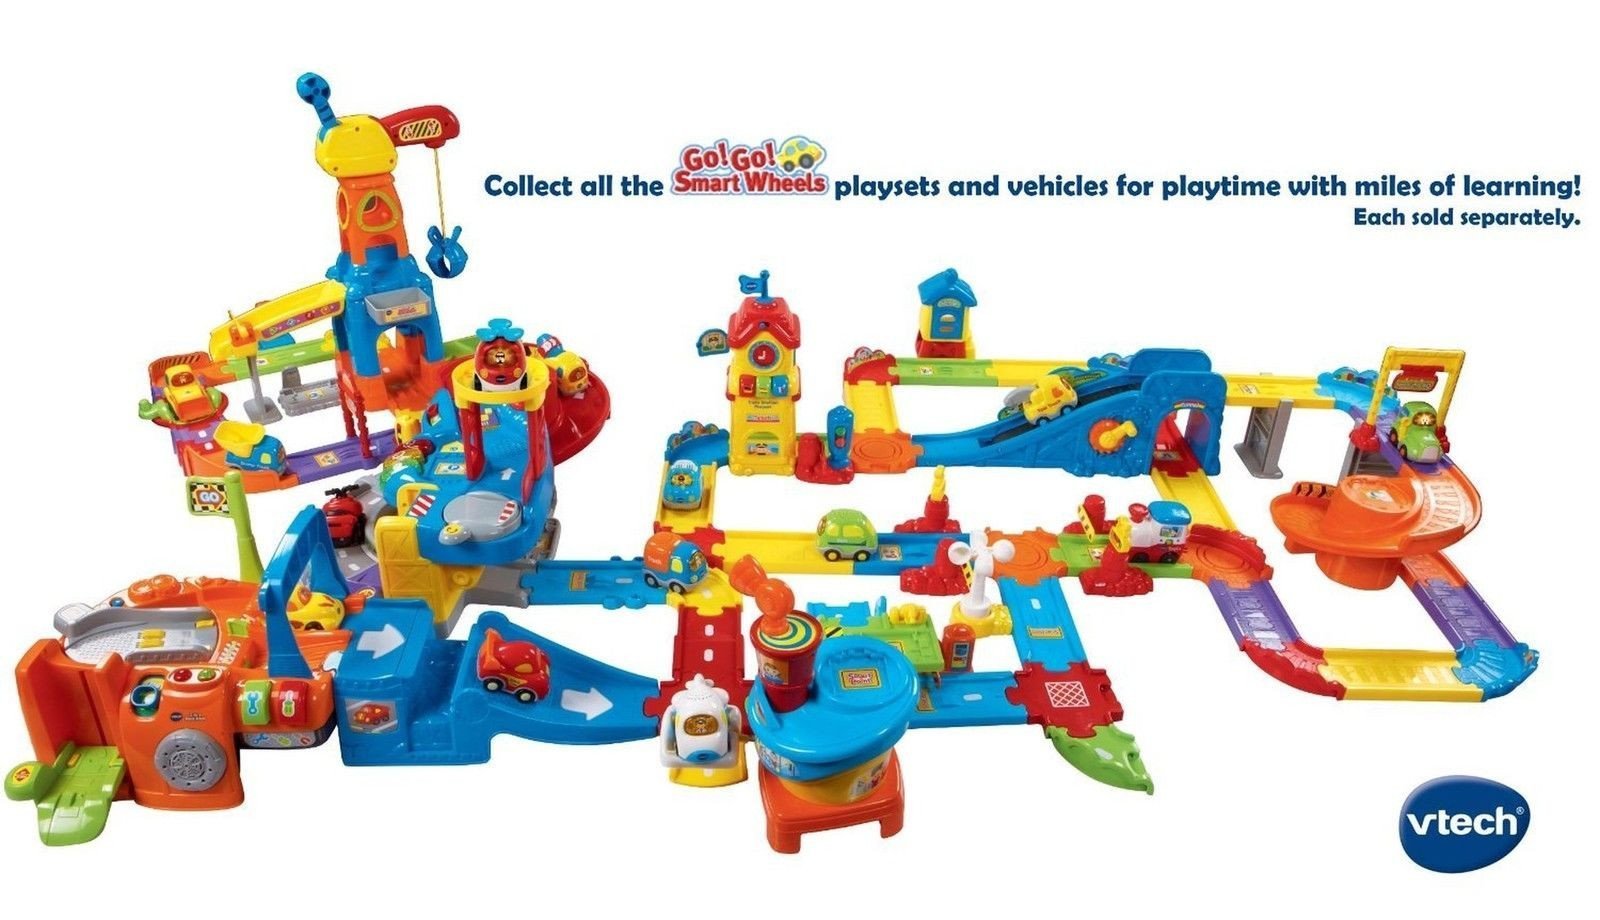 Vtech Go! Go! Smart Wheels Deluxe Track Playset Glossy Exclusive Paper - $24.95